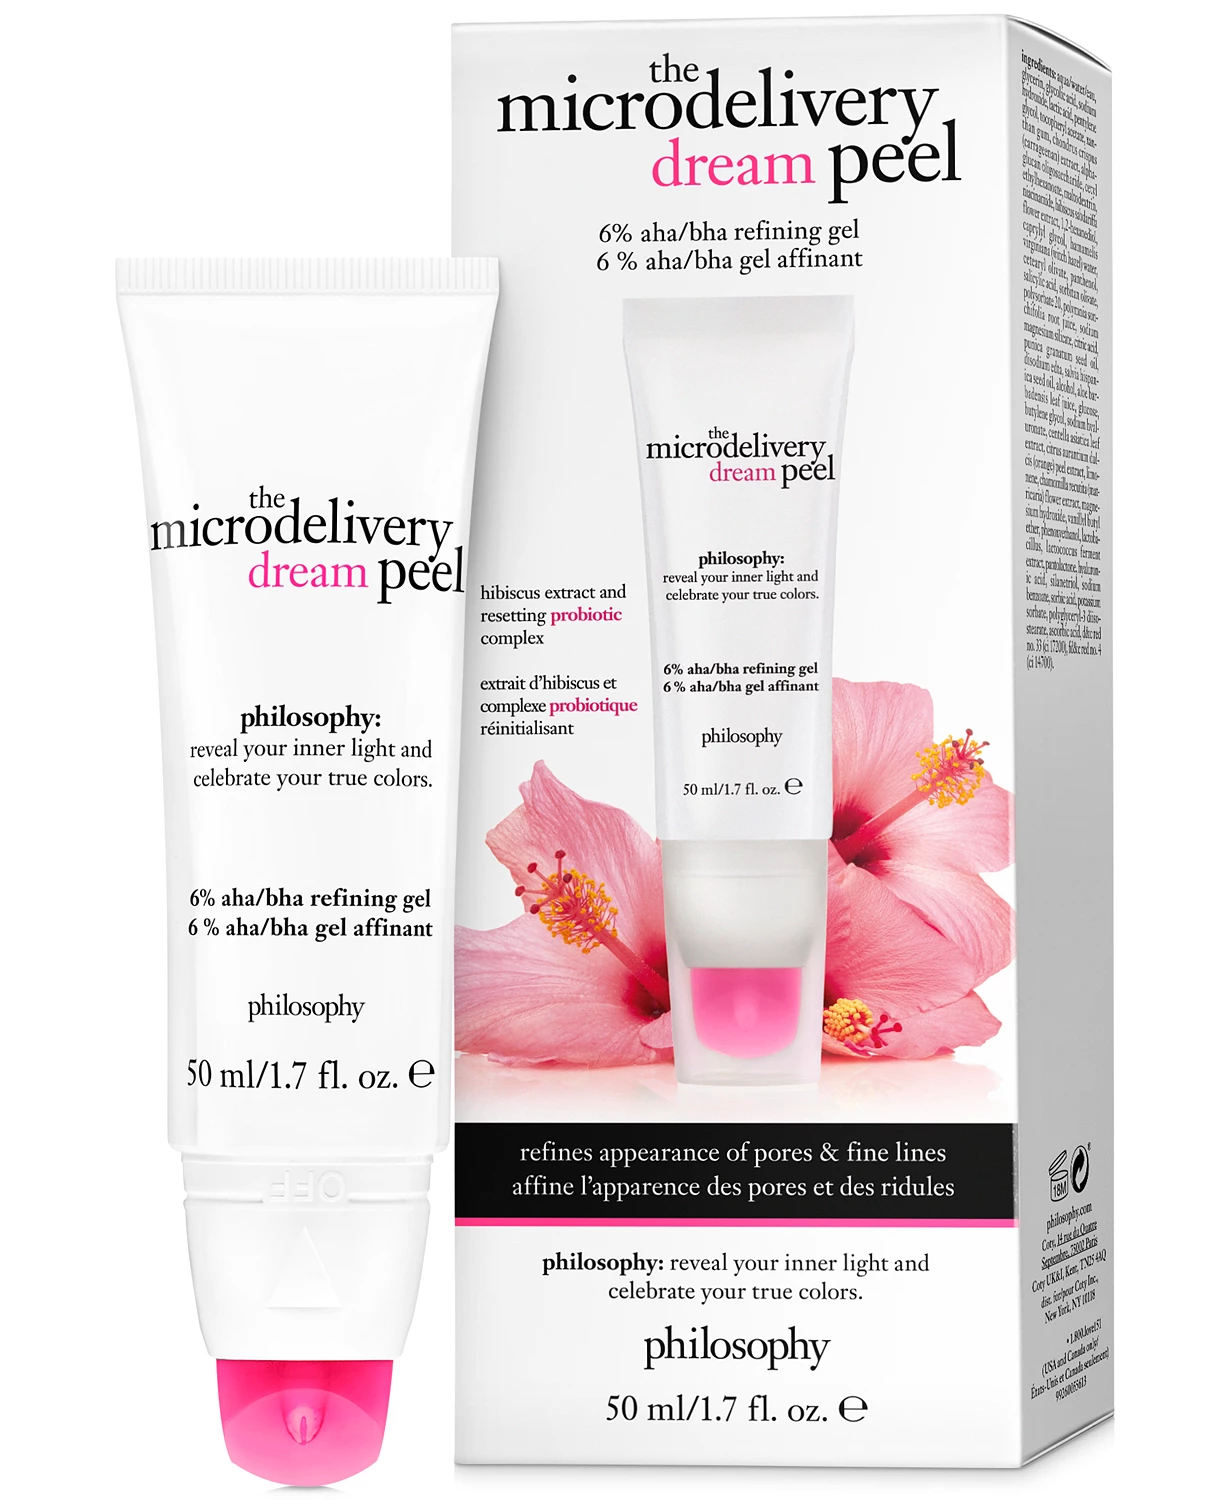 Philosophy Microdelivery Dream Peel Face Mask $20